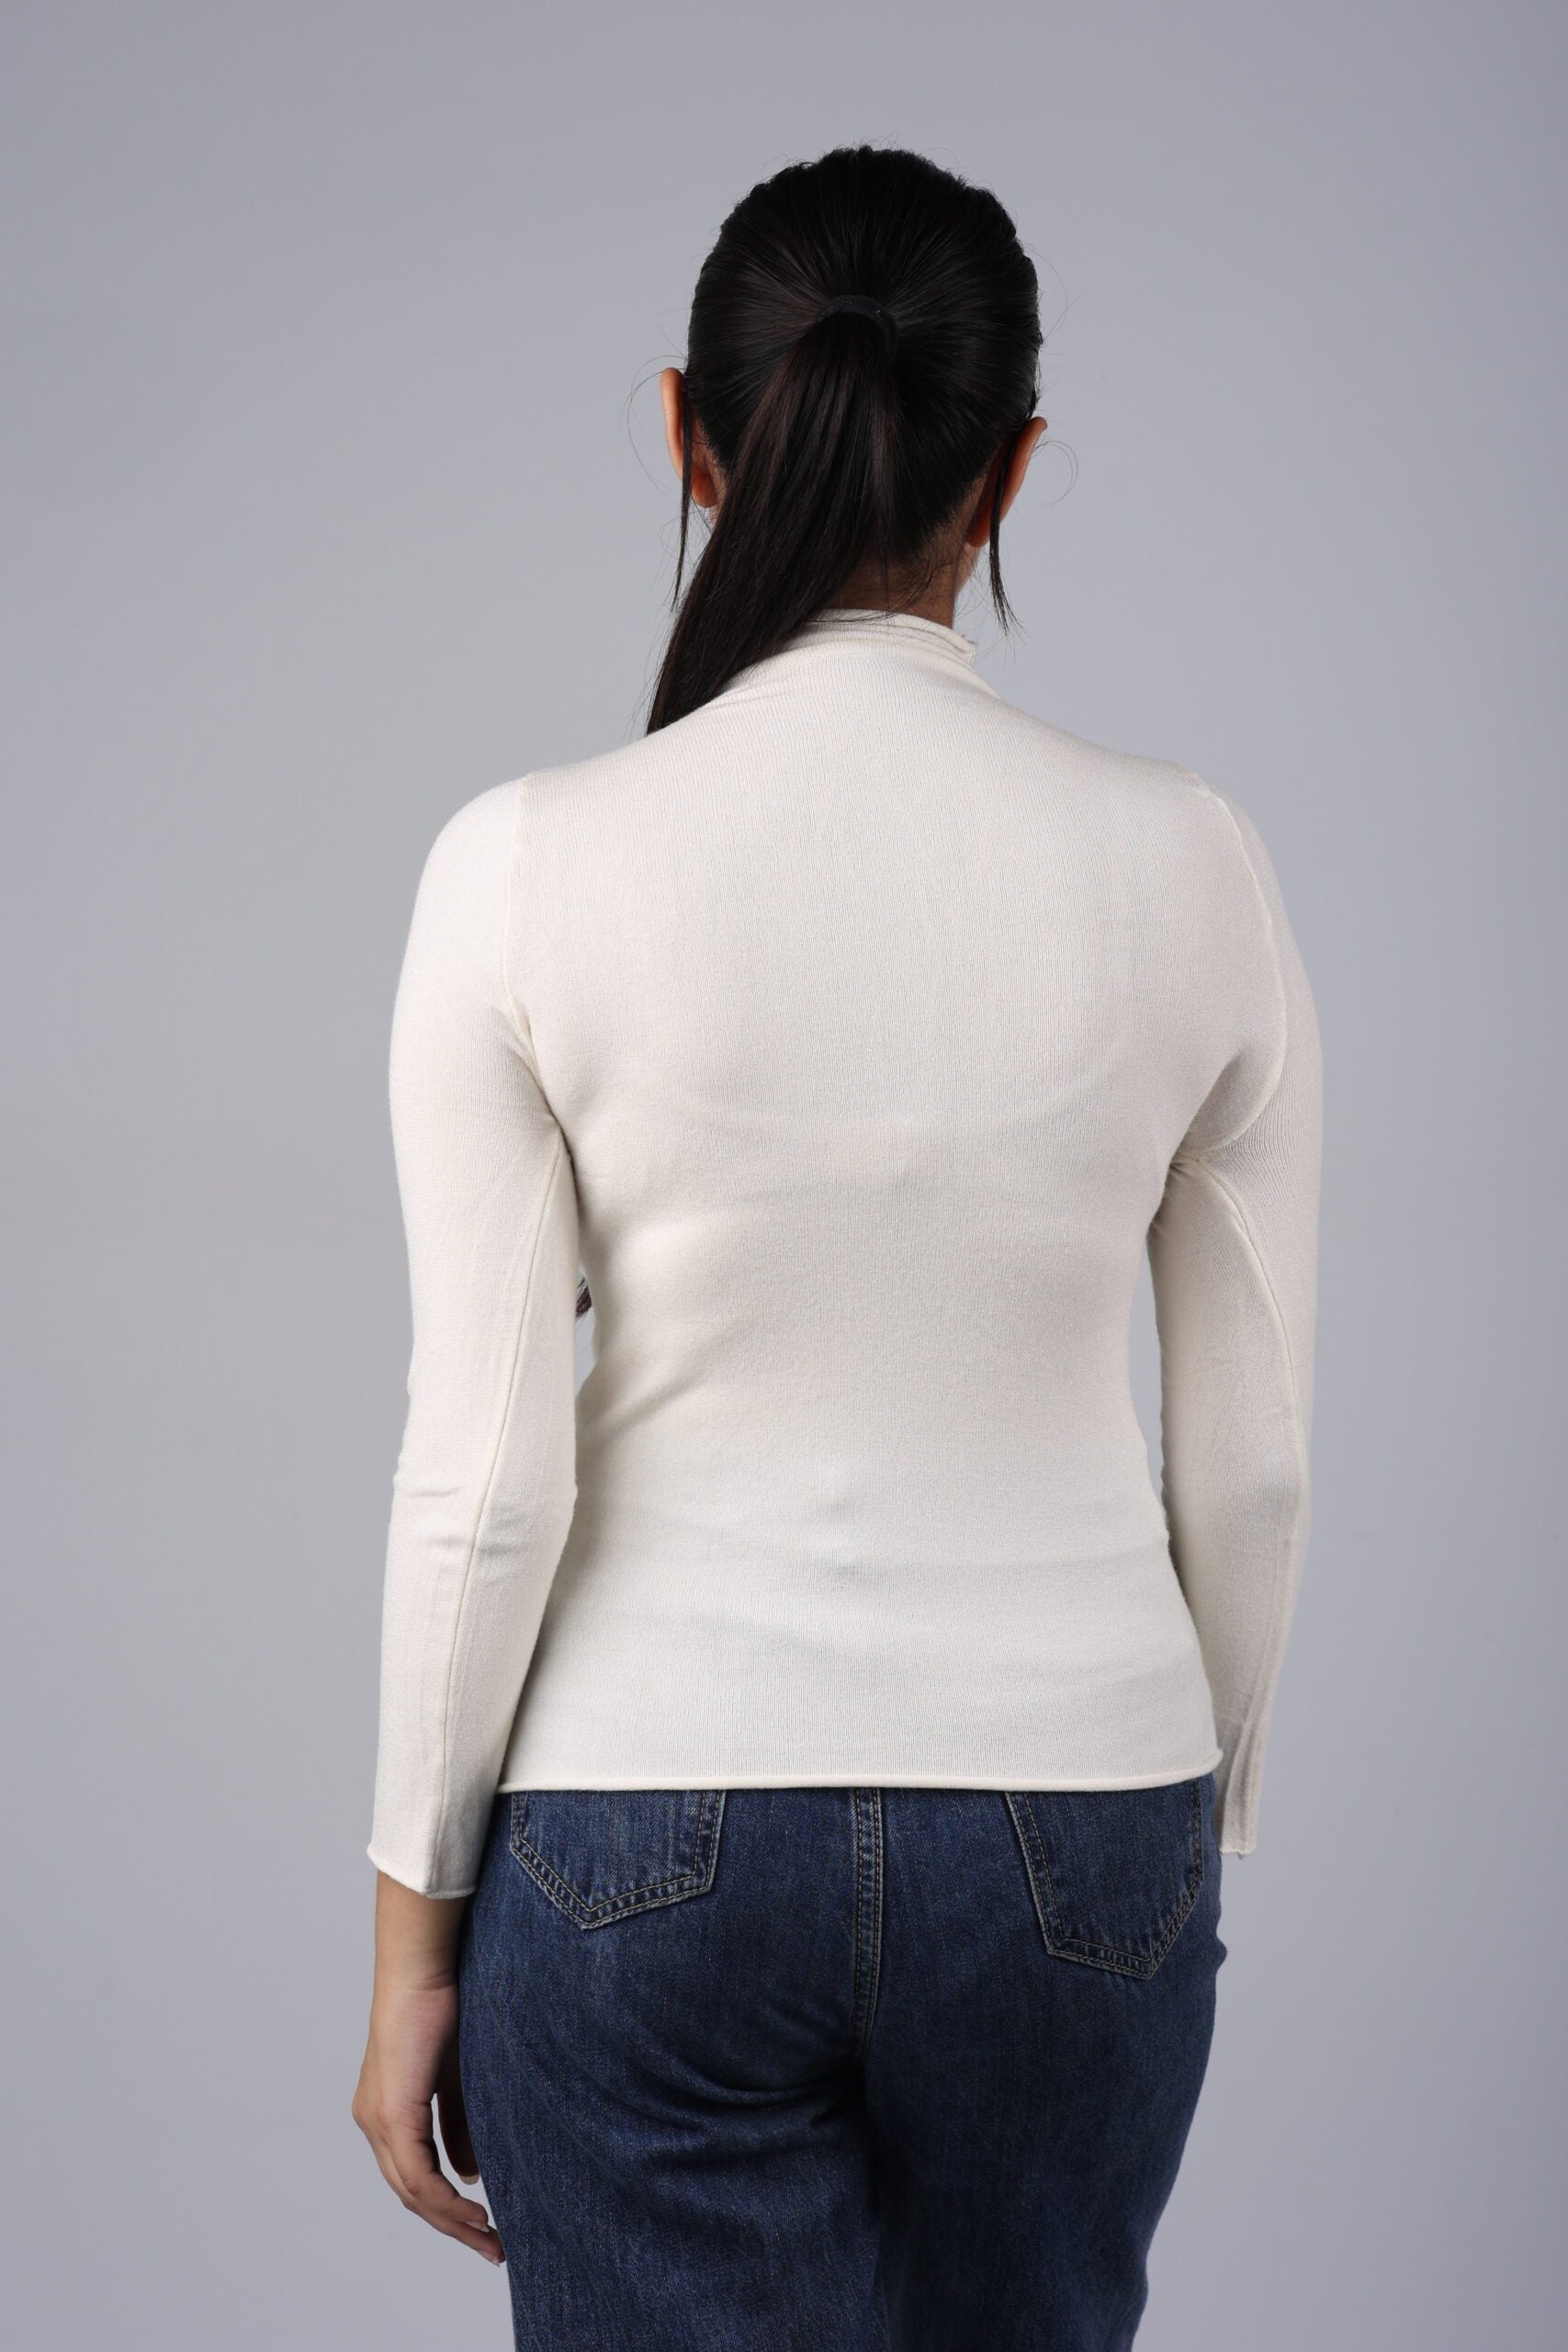 T-neck Basic Knitted Top (Off White) A Classic Wardrobe Staple for Timeless Comfort and Style!